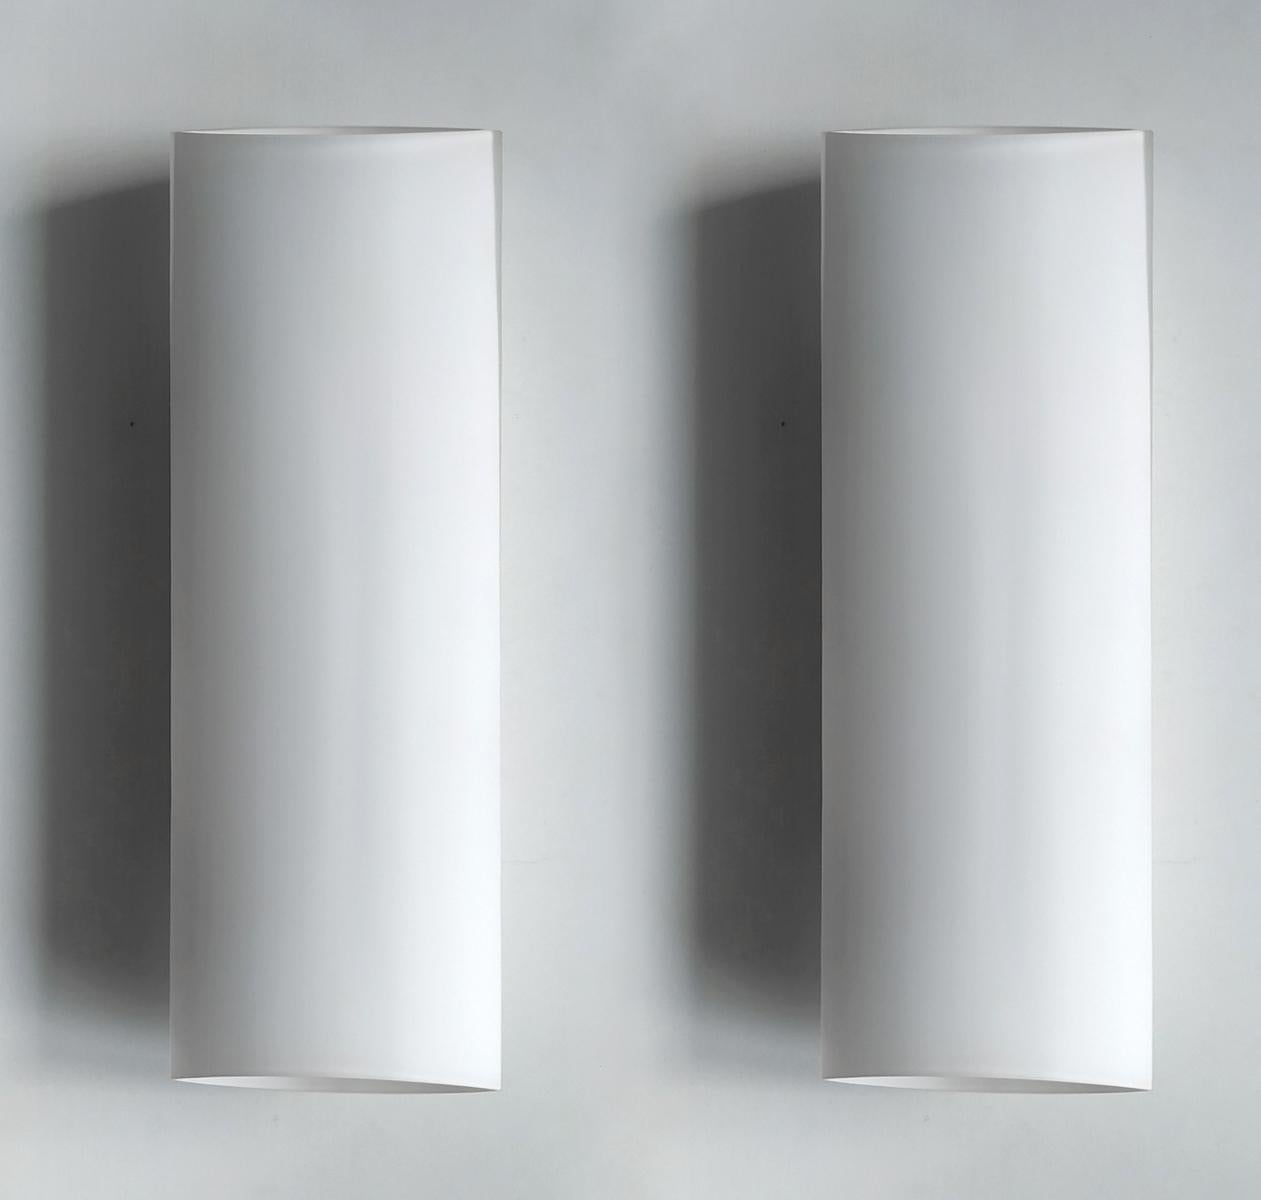 Set of 3 large matte white glass sconces,
Germany, 1970s - 1980s
Lamp sockets: 2.

